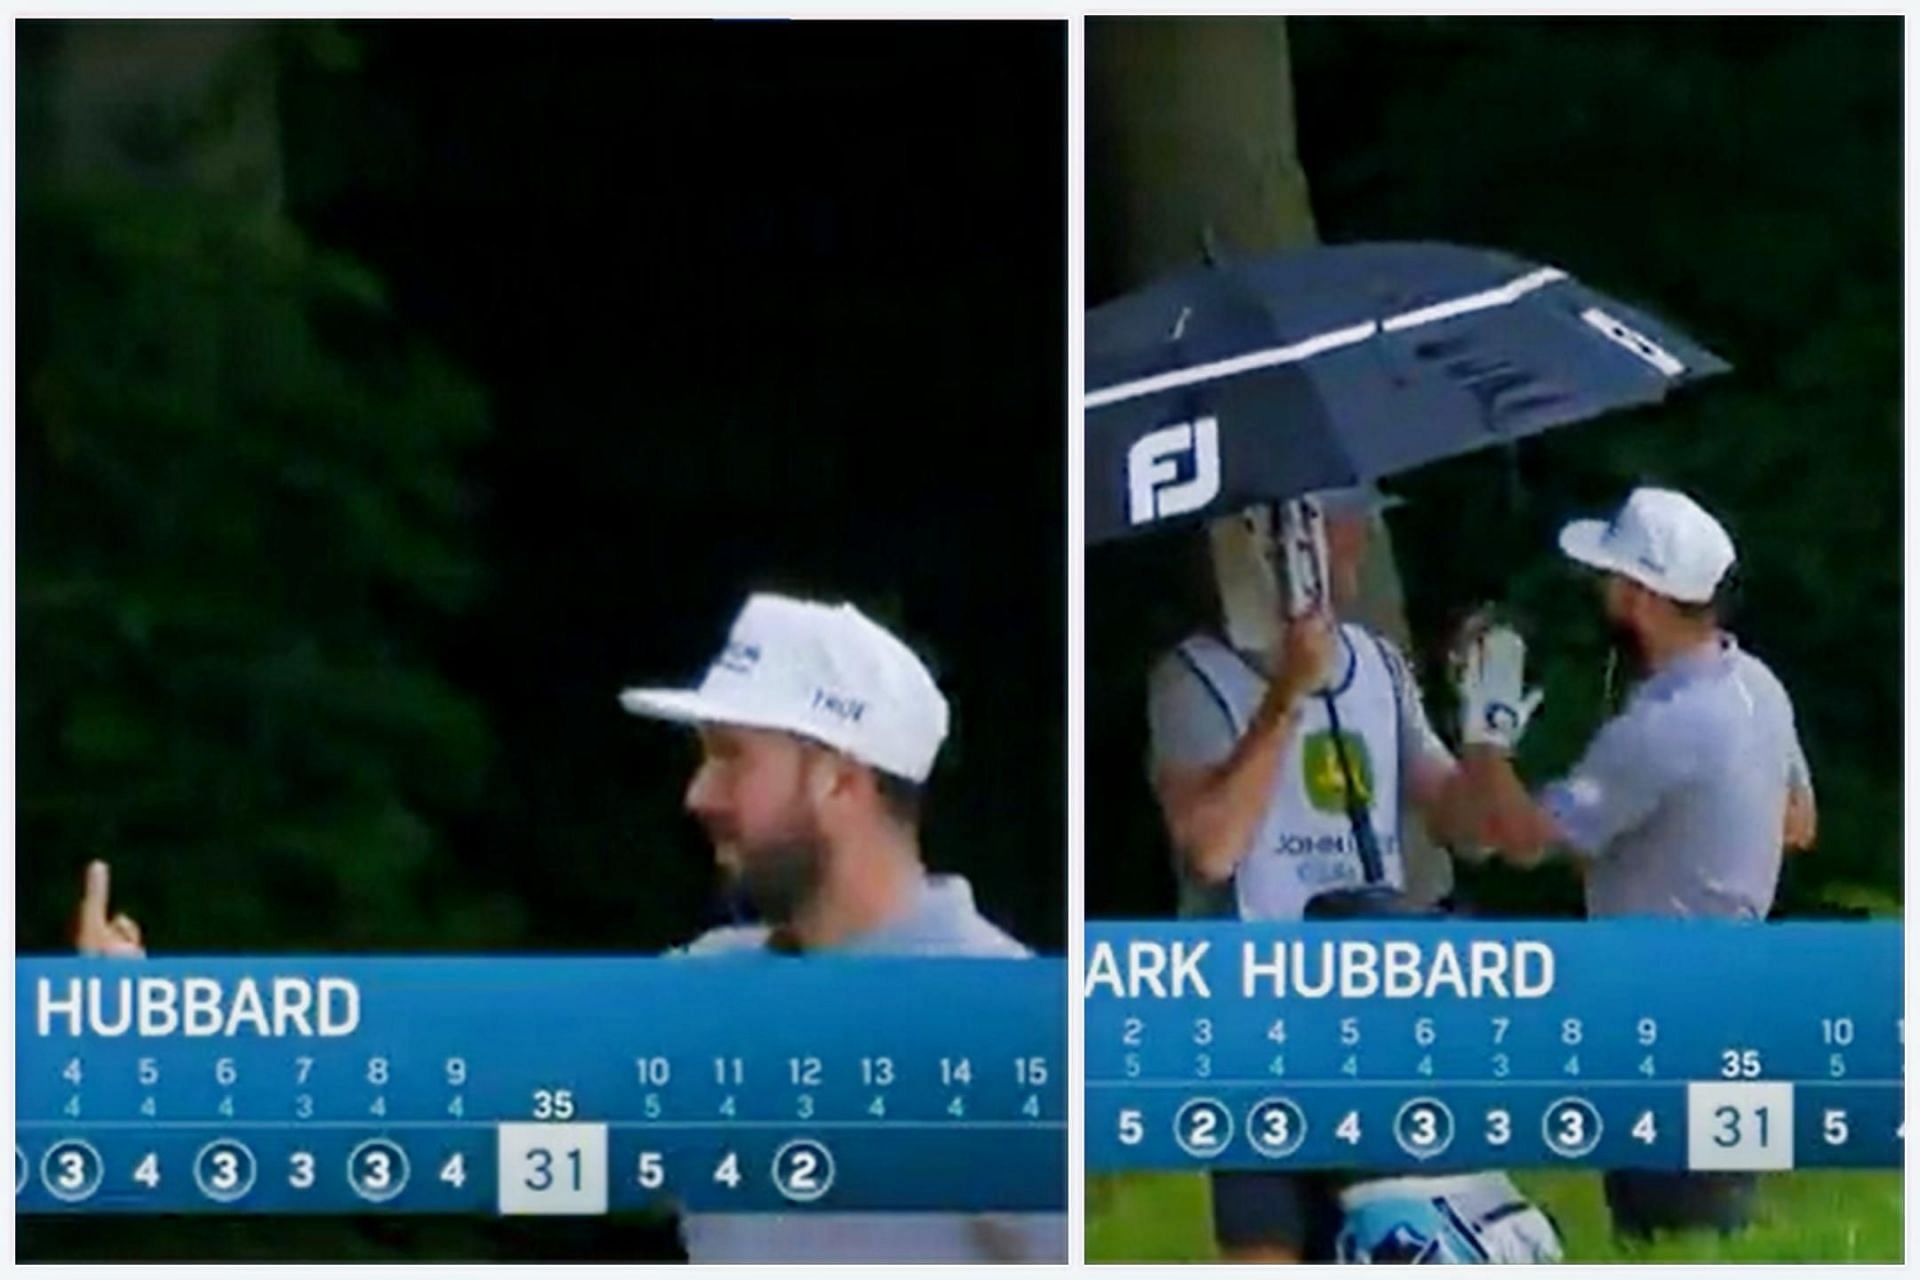 Mark Hubbard flipped off his caddie during the second round of John Deere Classic (Image via Twitter.com/bobdoessports)